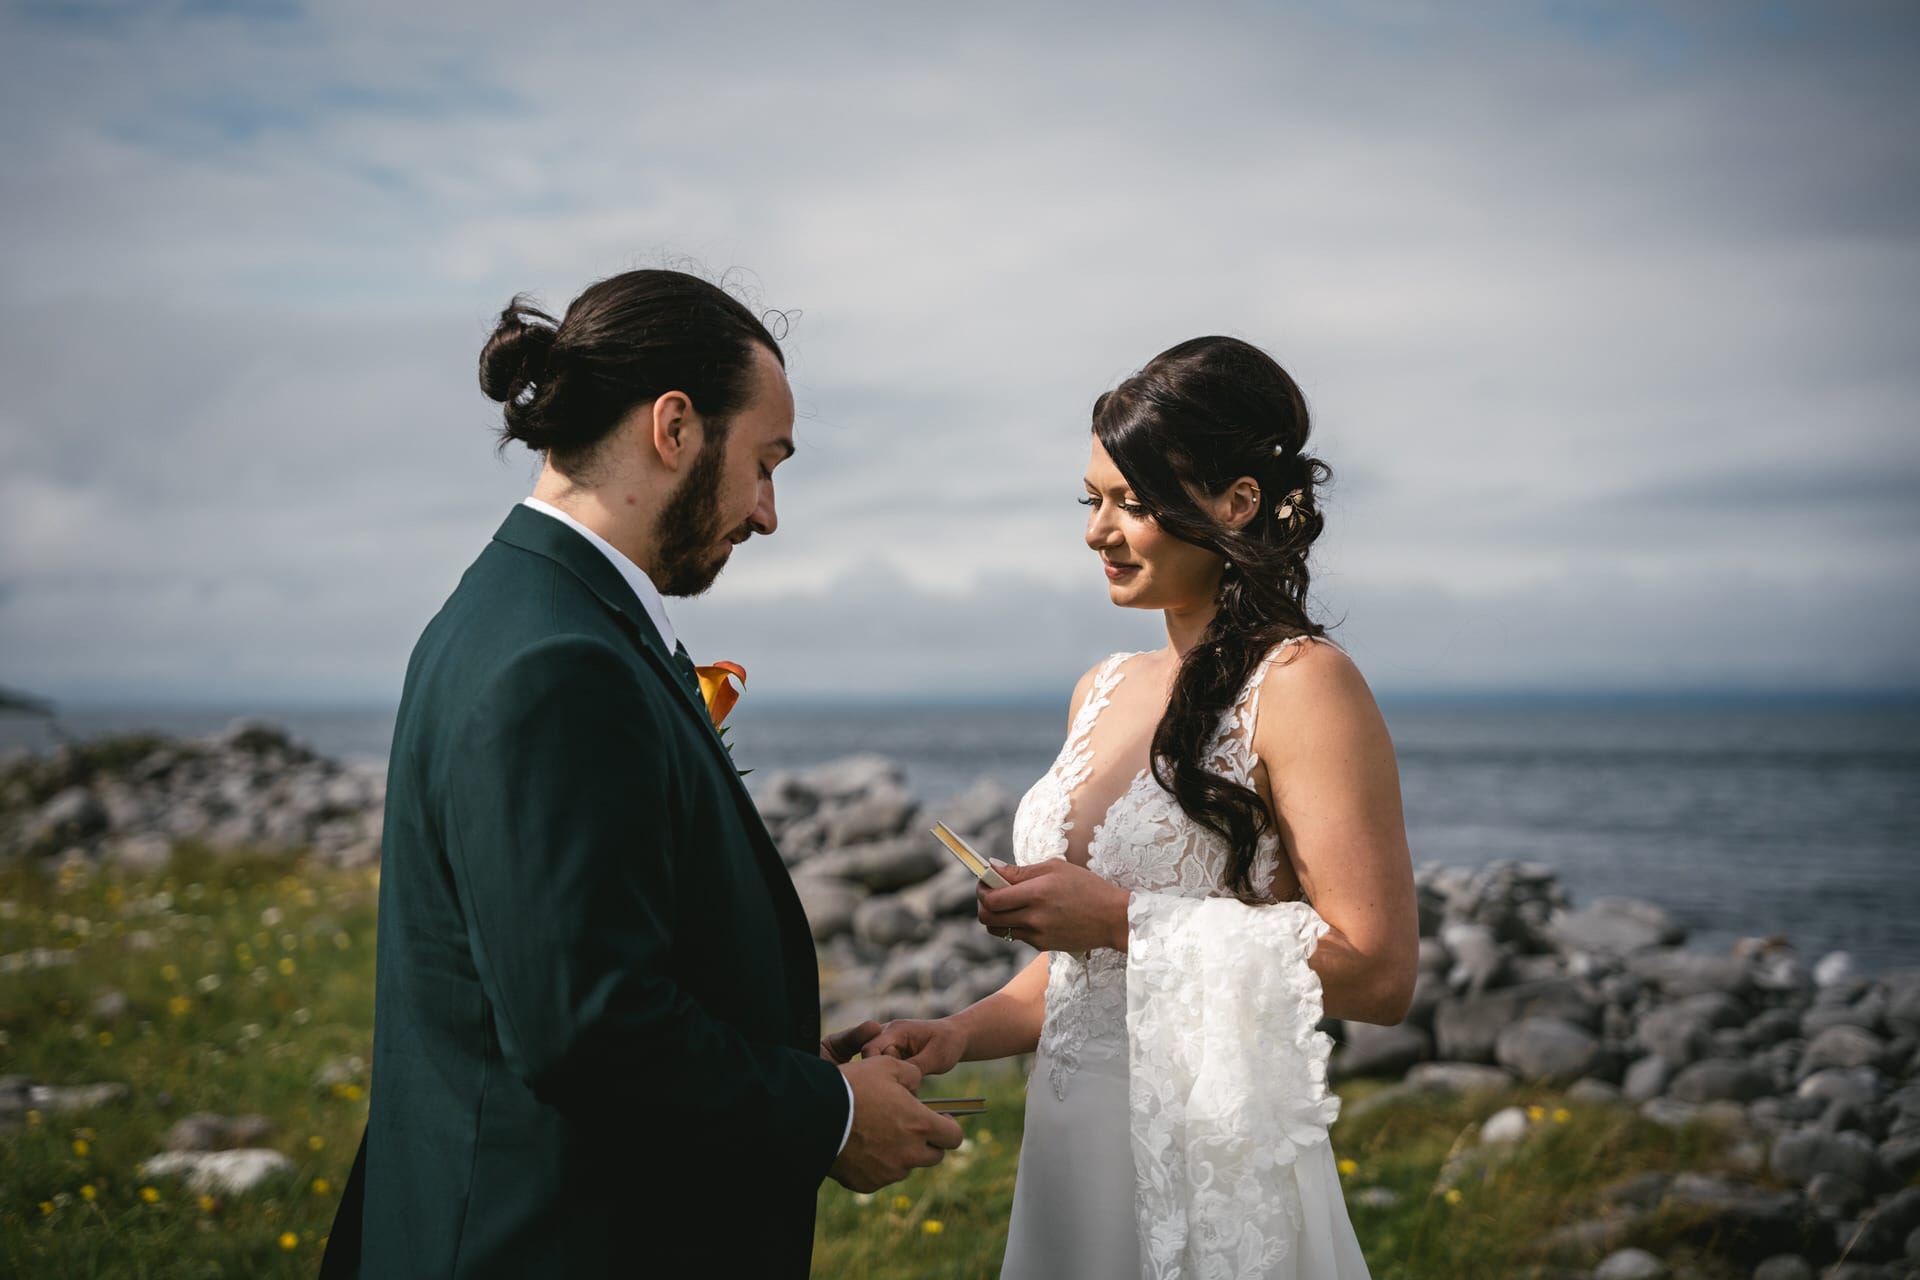 Irish elopement beauty: Vows exchanged in the castle's embrace.